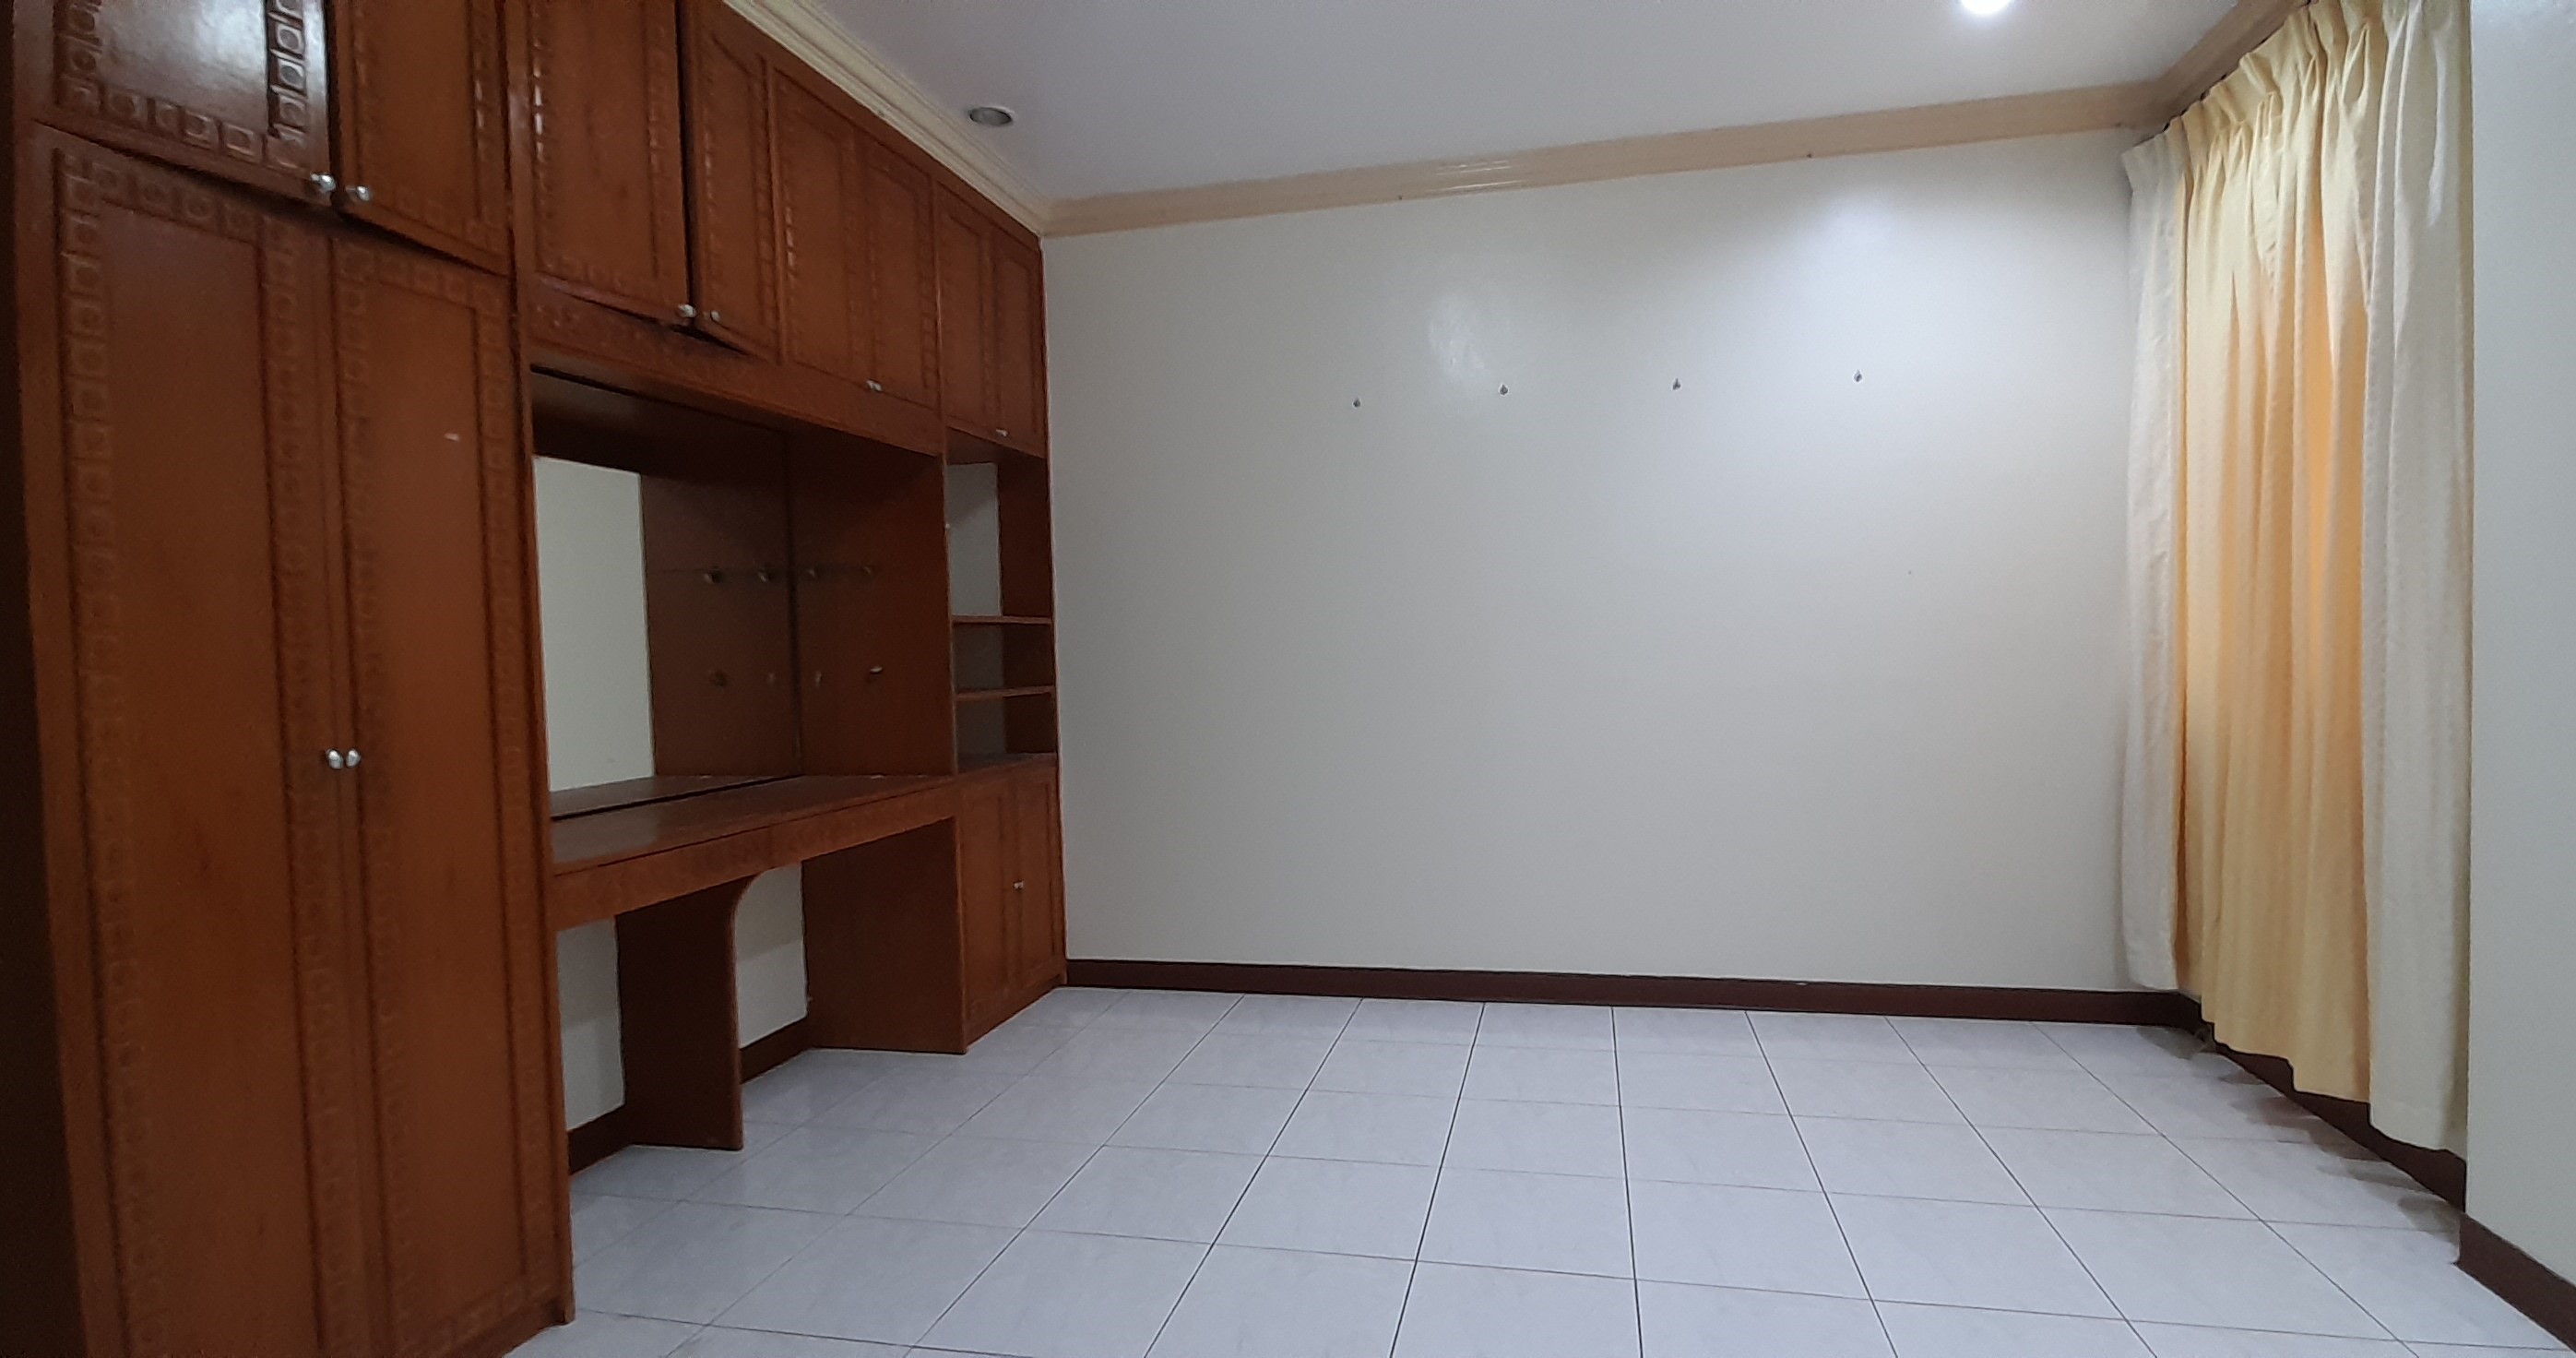 3-bedrooms-and-semi-furnished-apartment-in-banilad-cebu-city